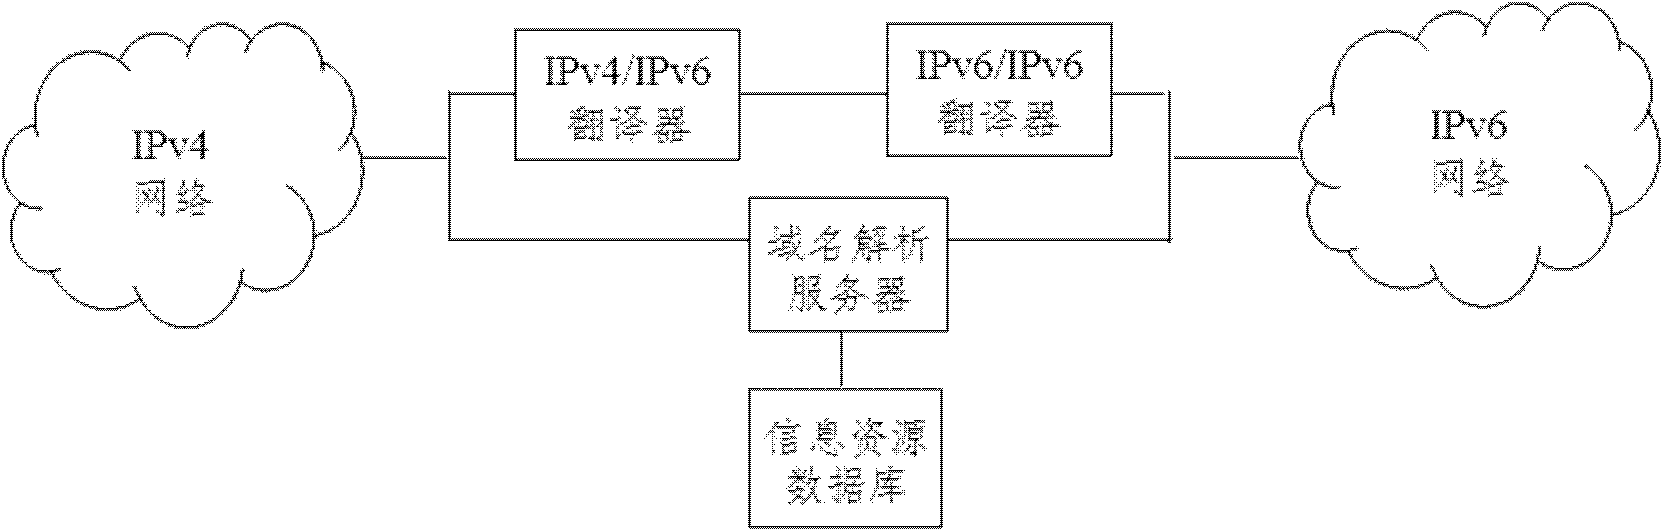 Method for translating Internet protocol version 4 (IPv4)/Internet protocol version 6 (IPv6) initiating communication by using IPv4 based on cloud service